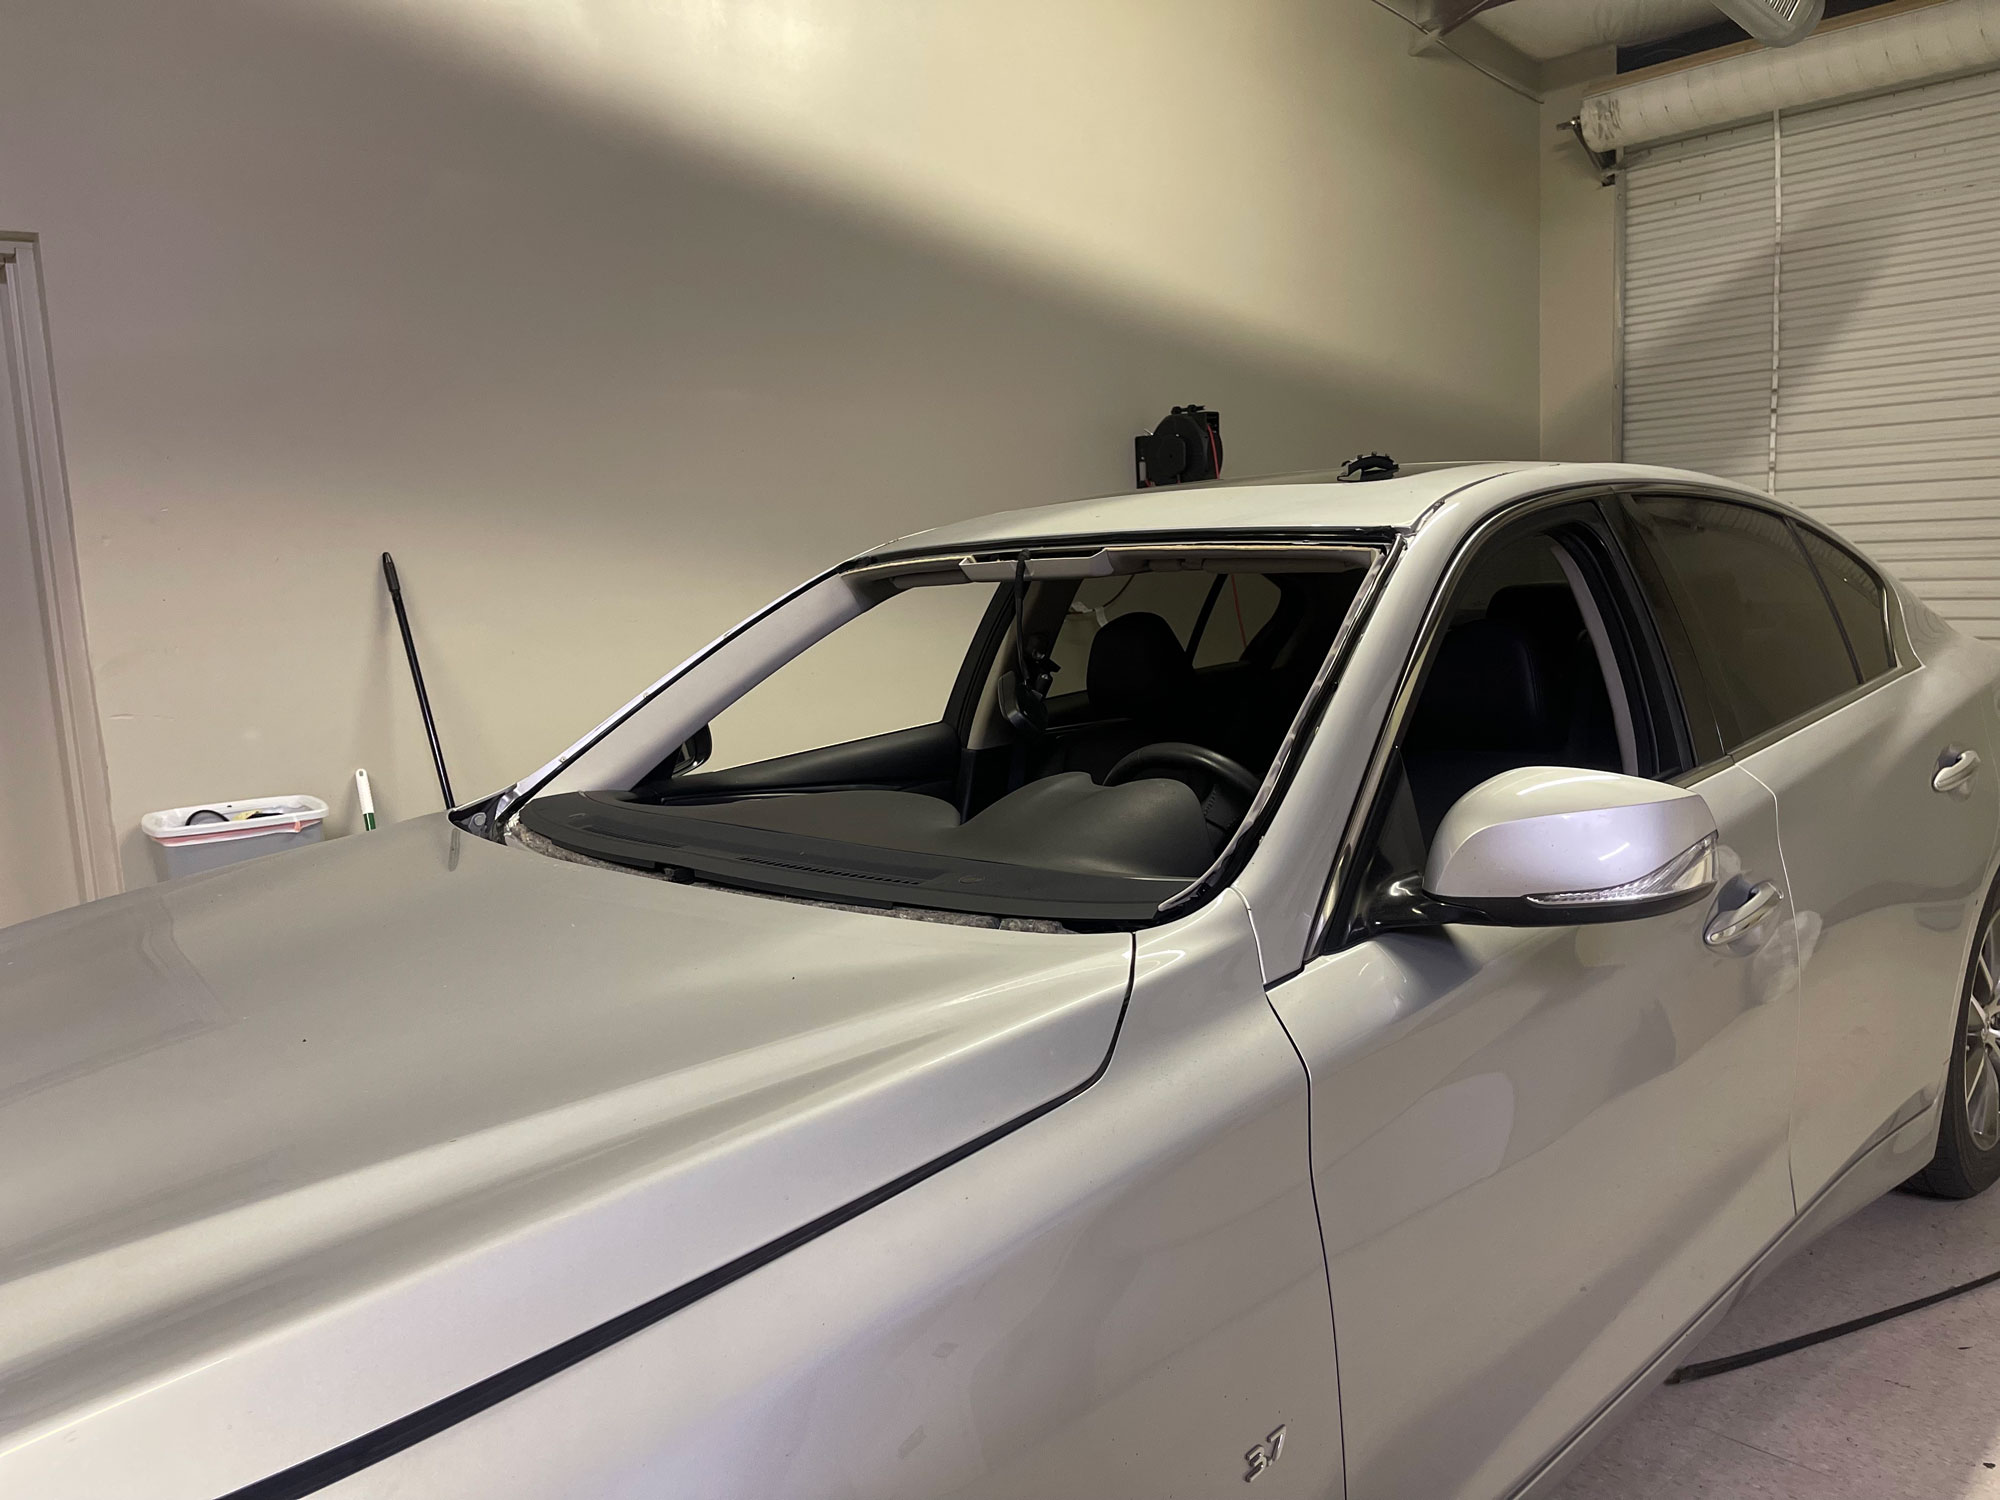 bmw windshield replacement near me